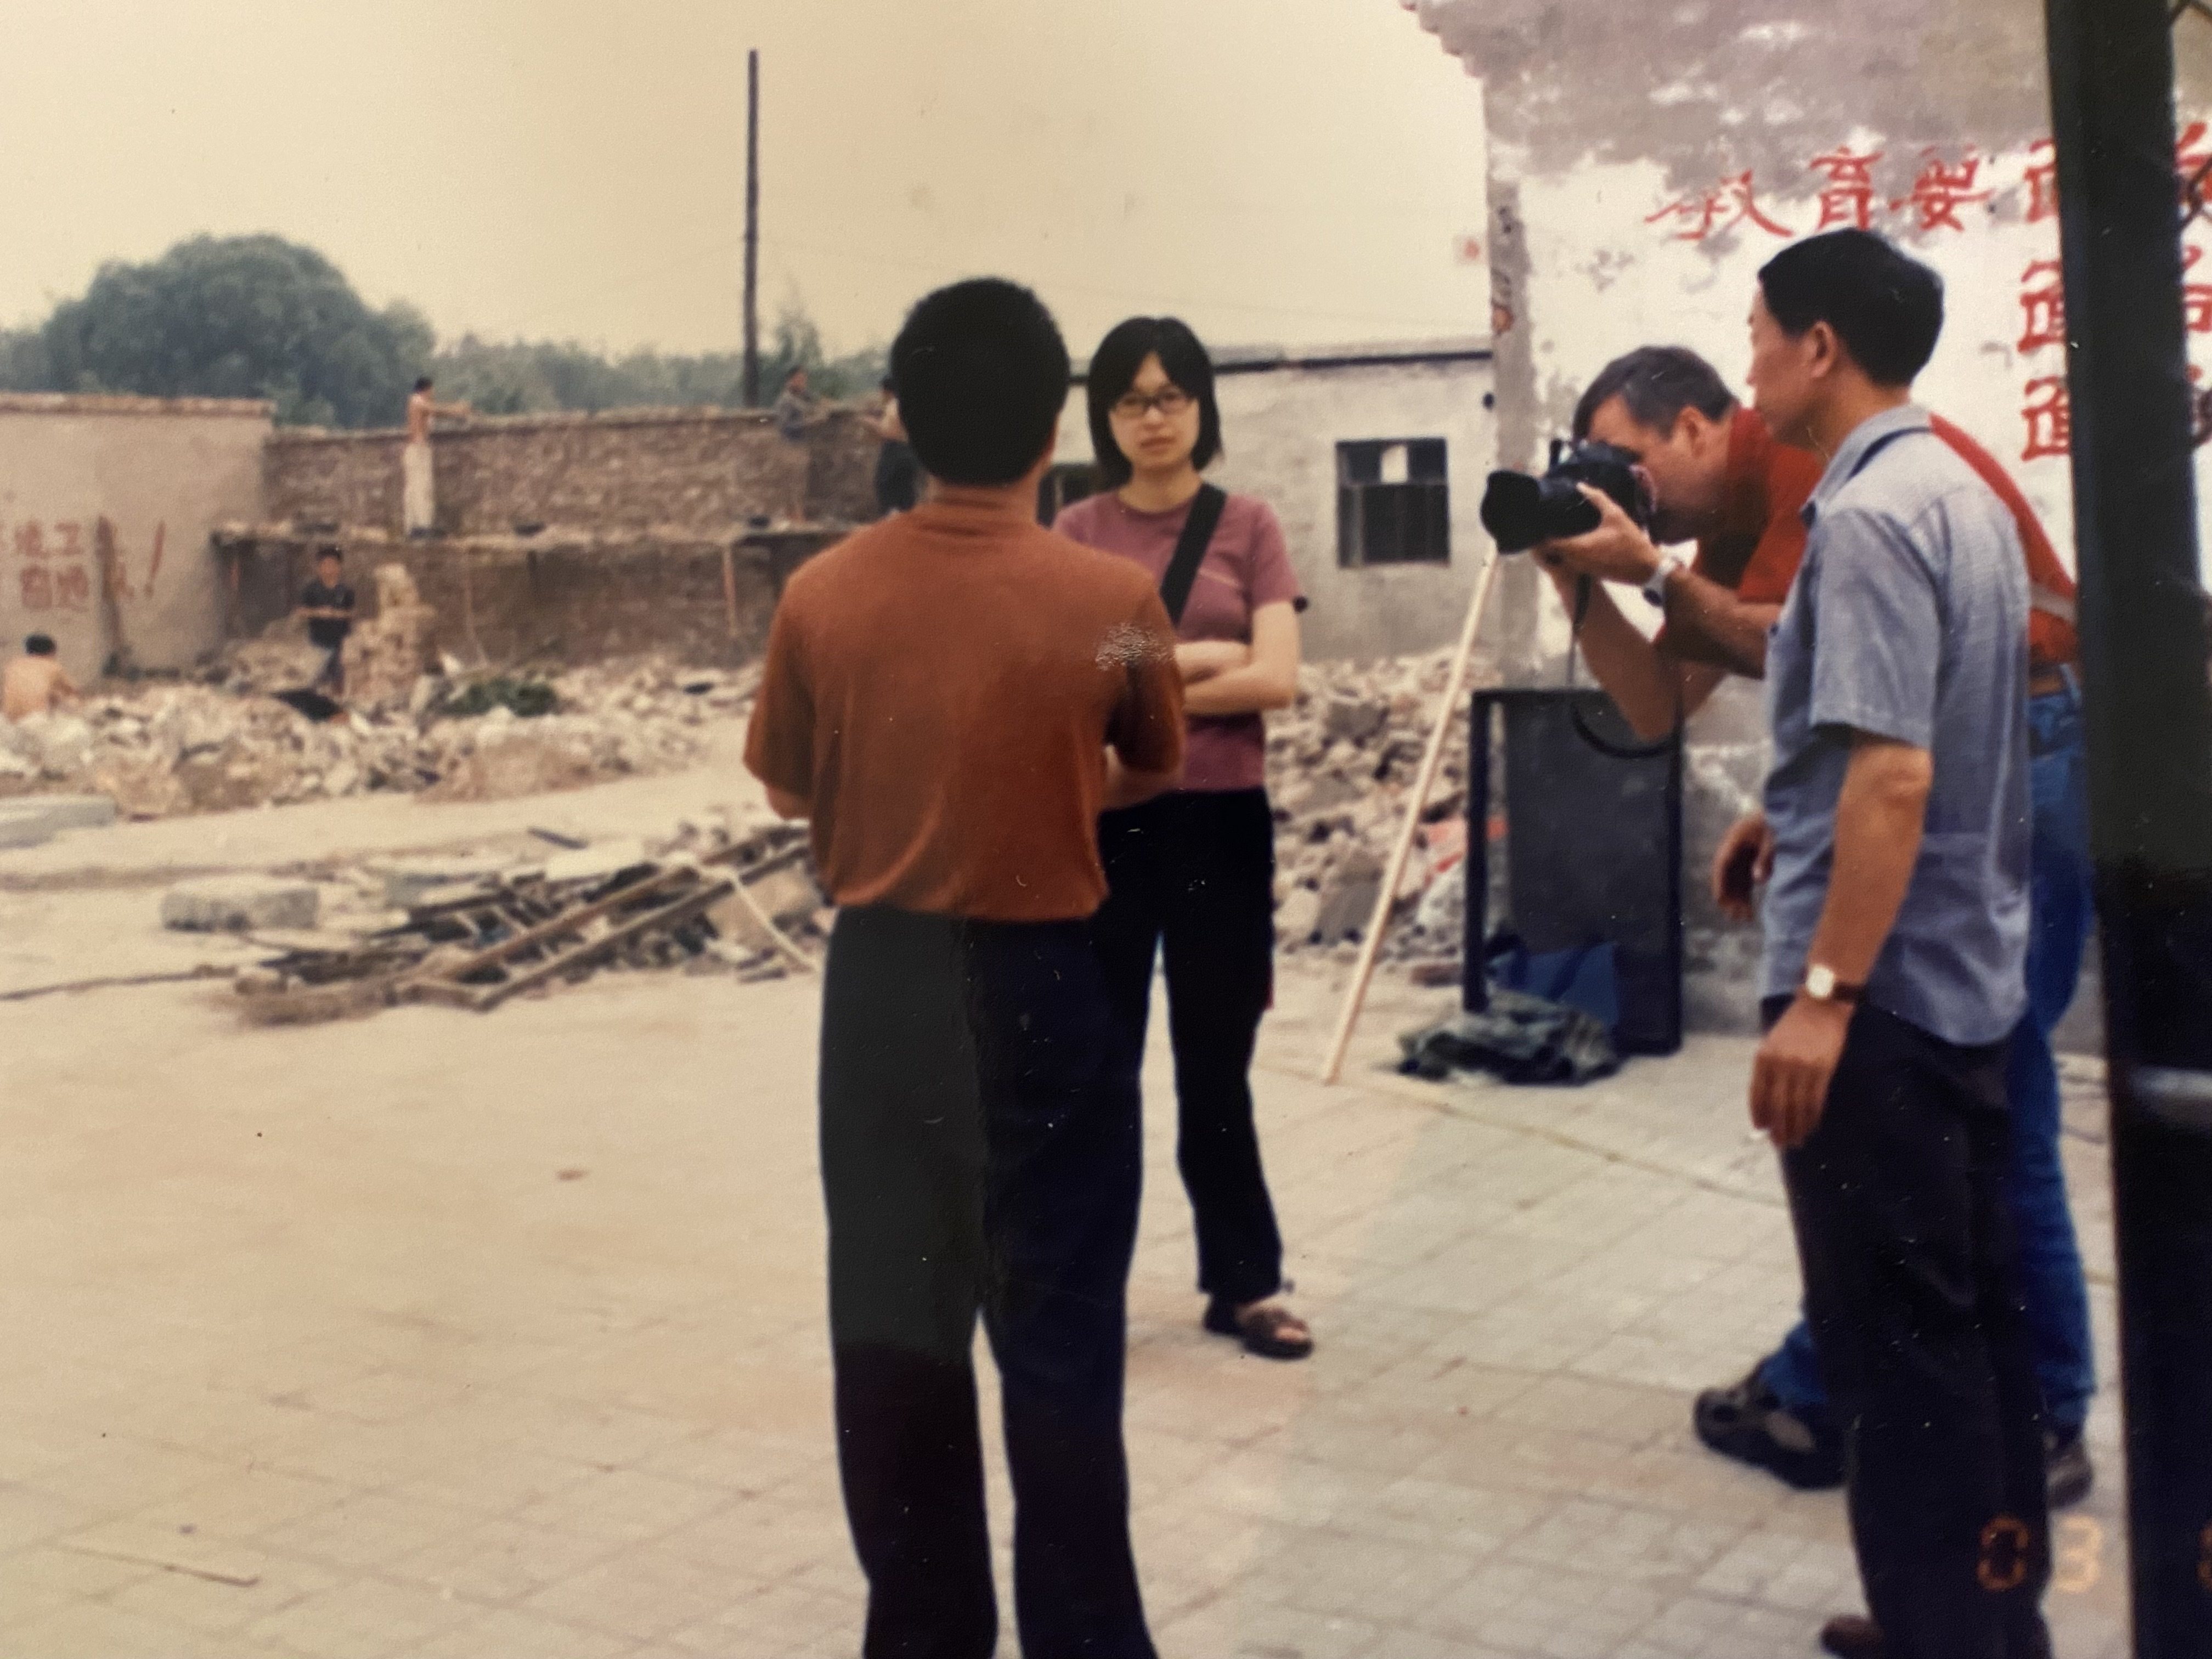 South China Morning Post journalist Josephine Ma interviews victims of demolition in Beijing in 2003, with SCMP photographer Mark Ralston. 